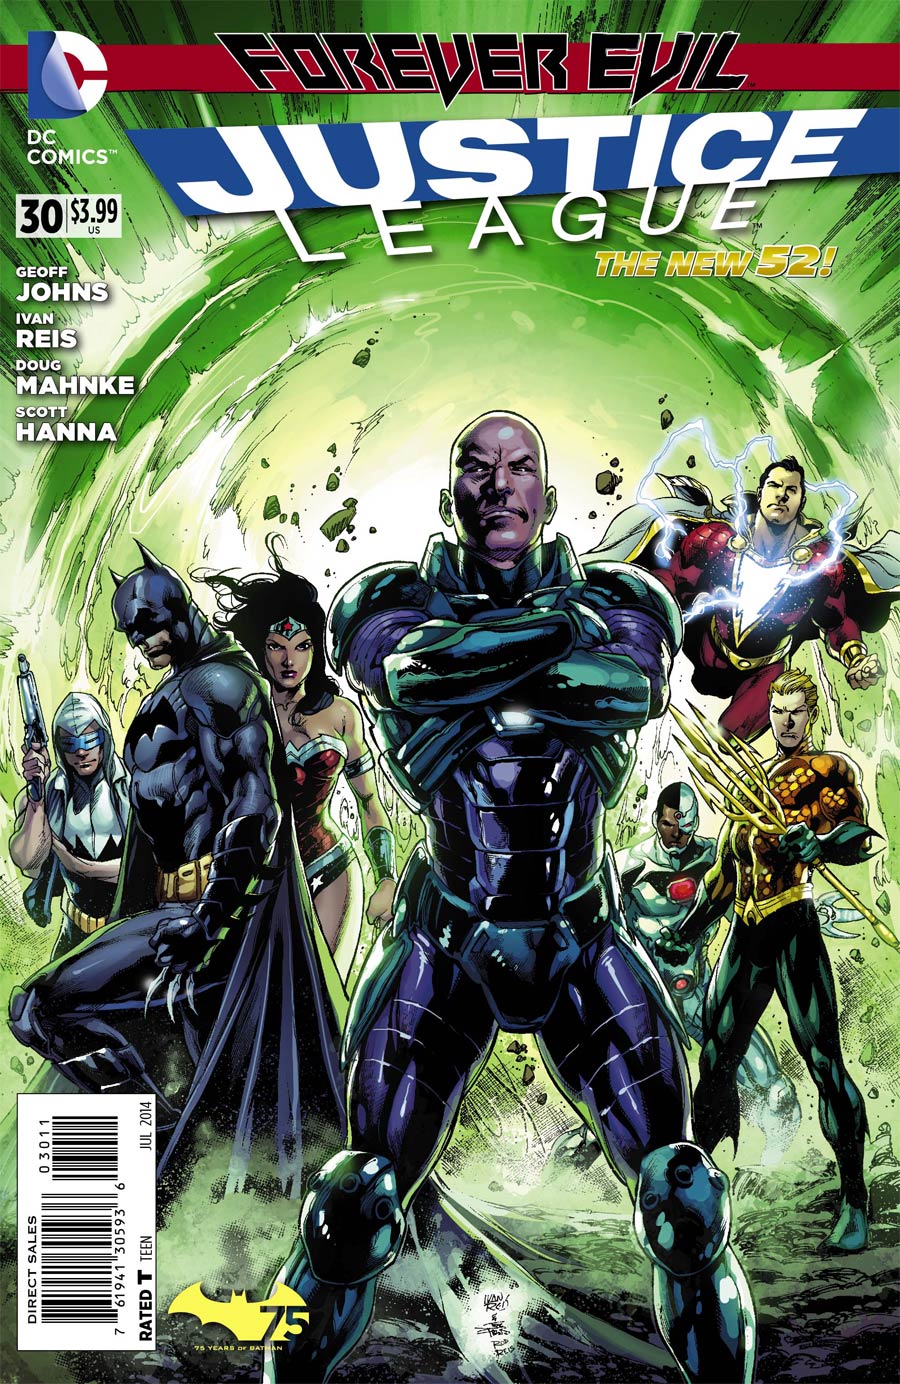 Justice League Vol 2 #30 Cover A Regular Ivan Reis Cover (Forever Evil Aftermath)